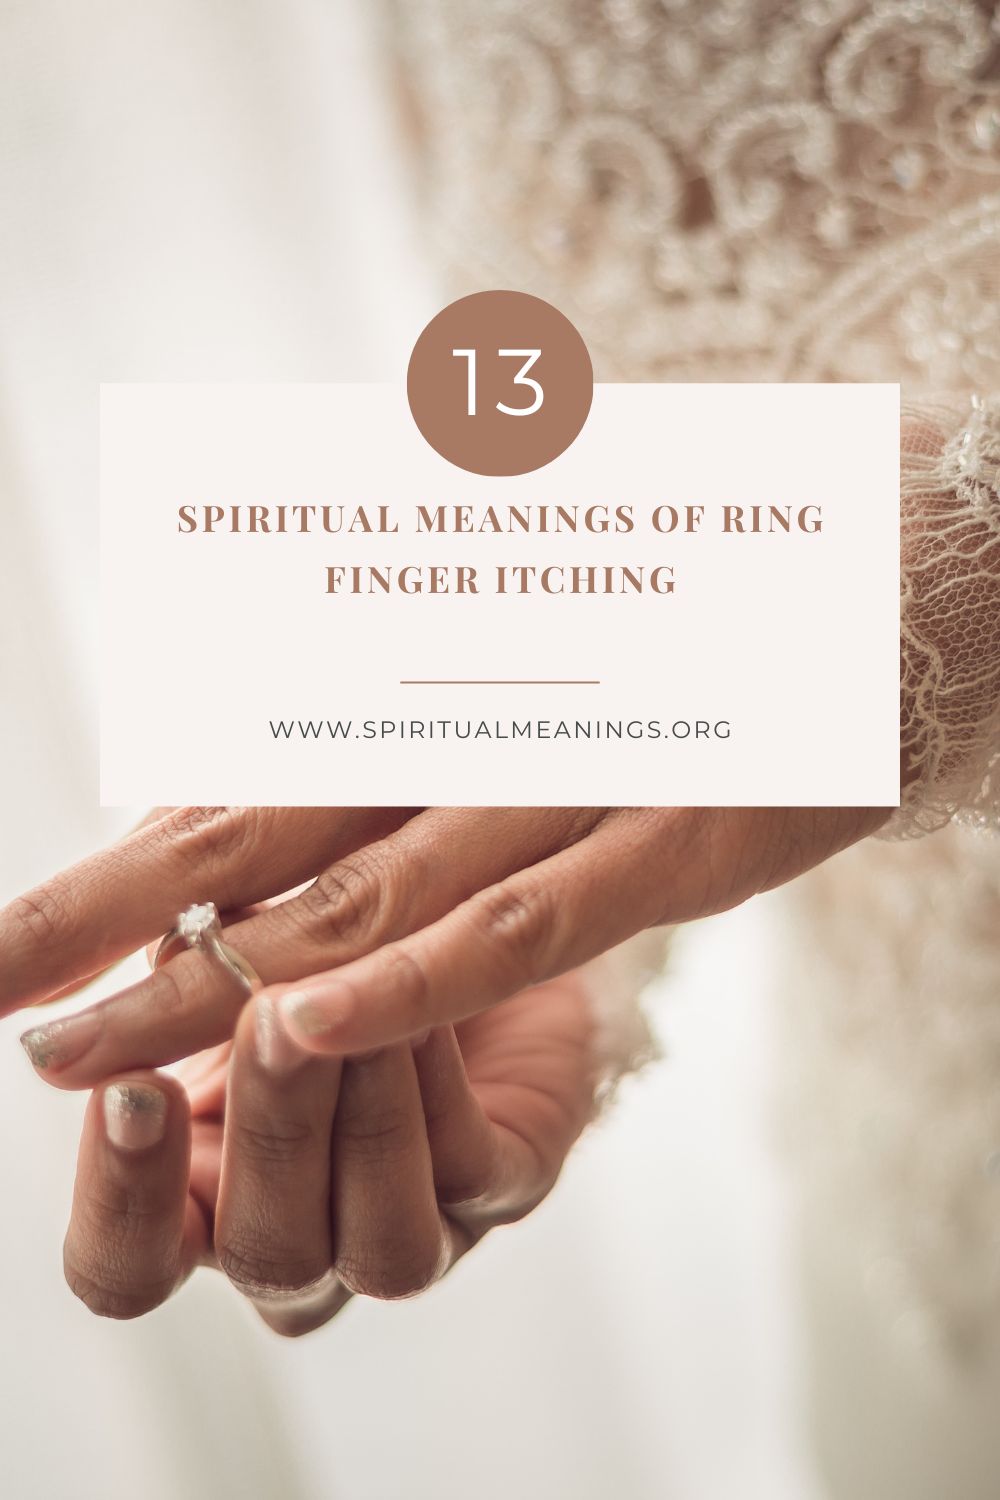 13 Spiritual Meanings of Ring Finger Itching